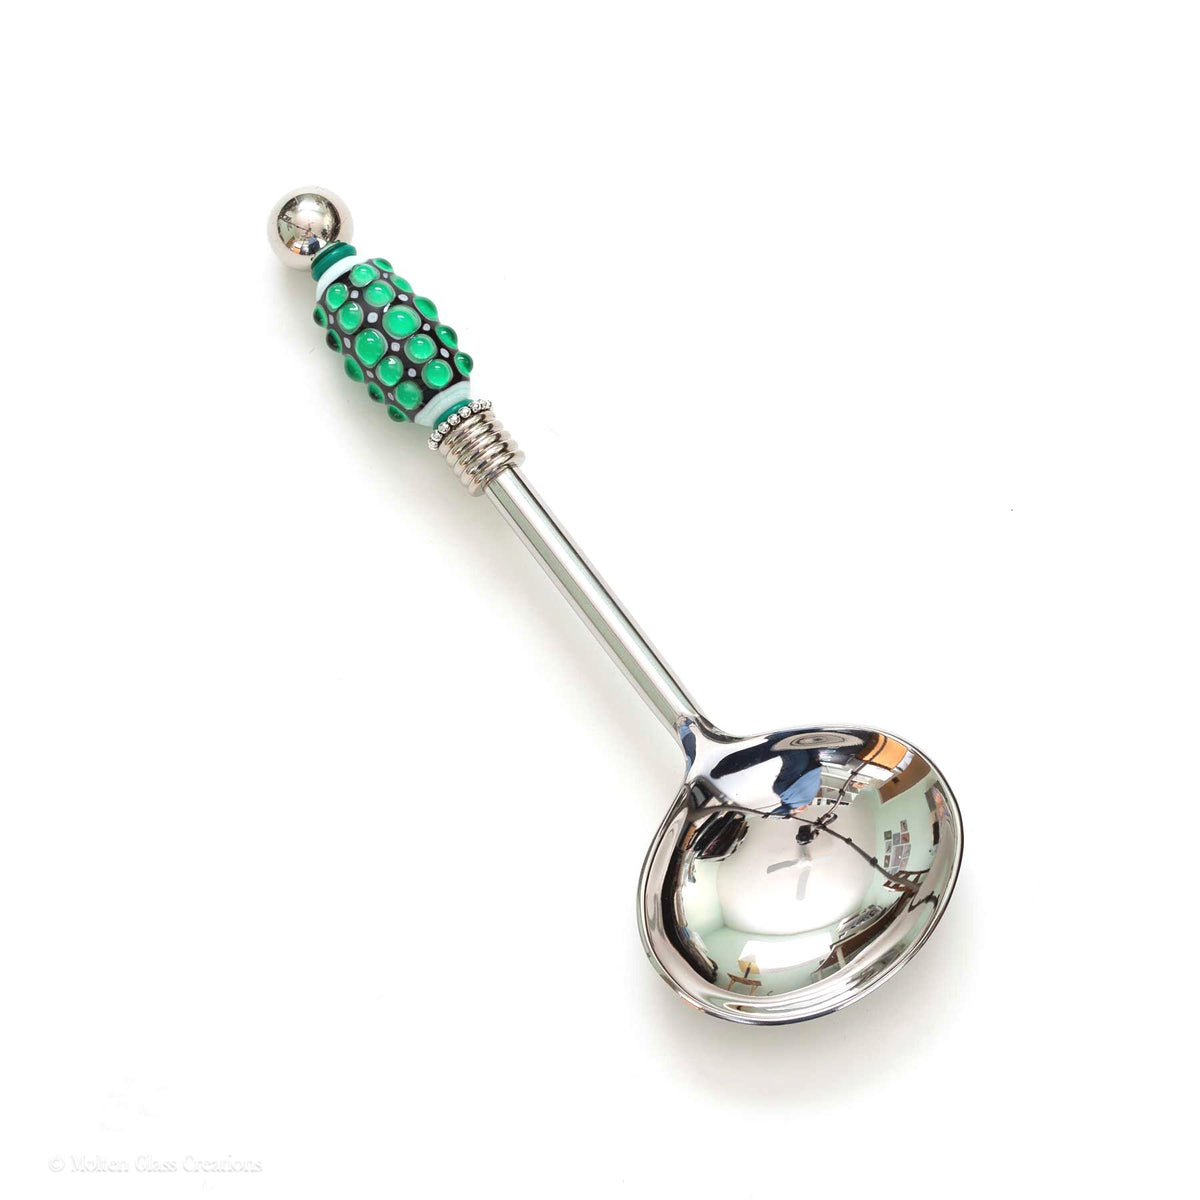 Beaded Serving Spoon - Green Dots